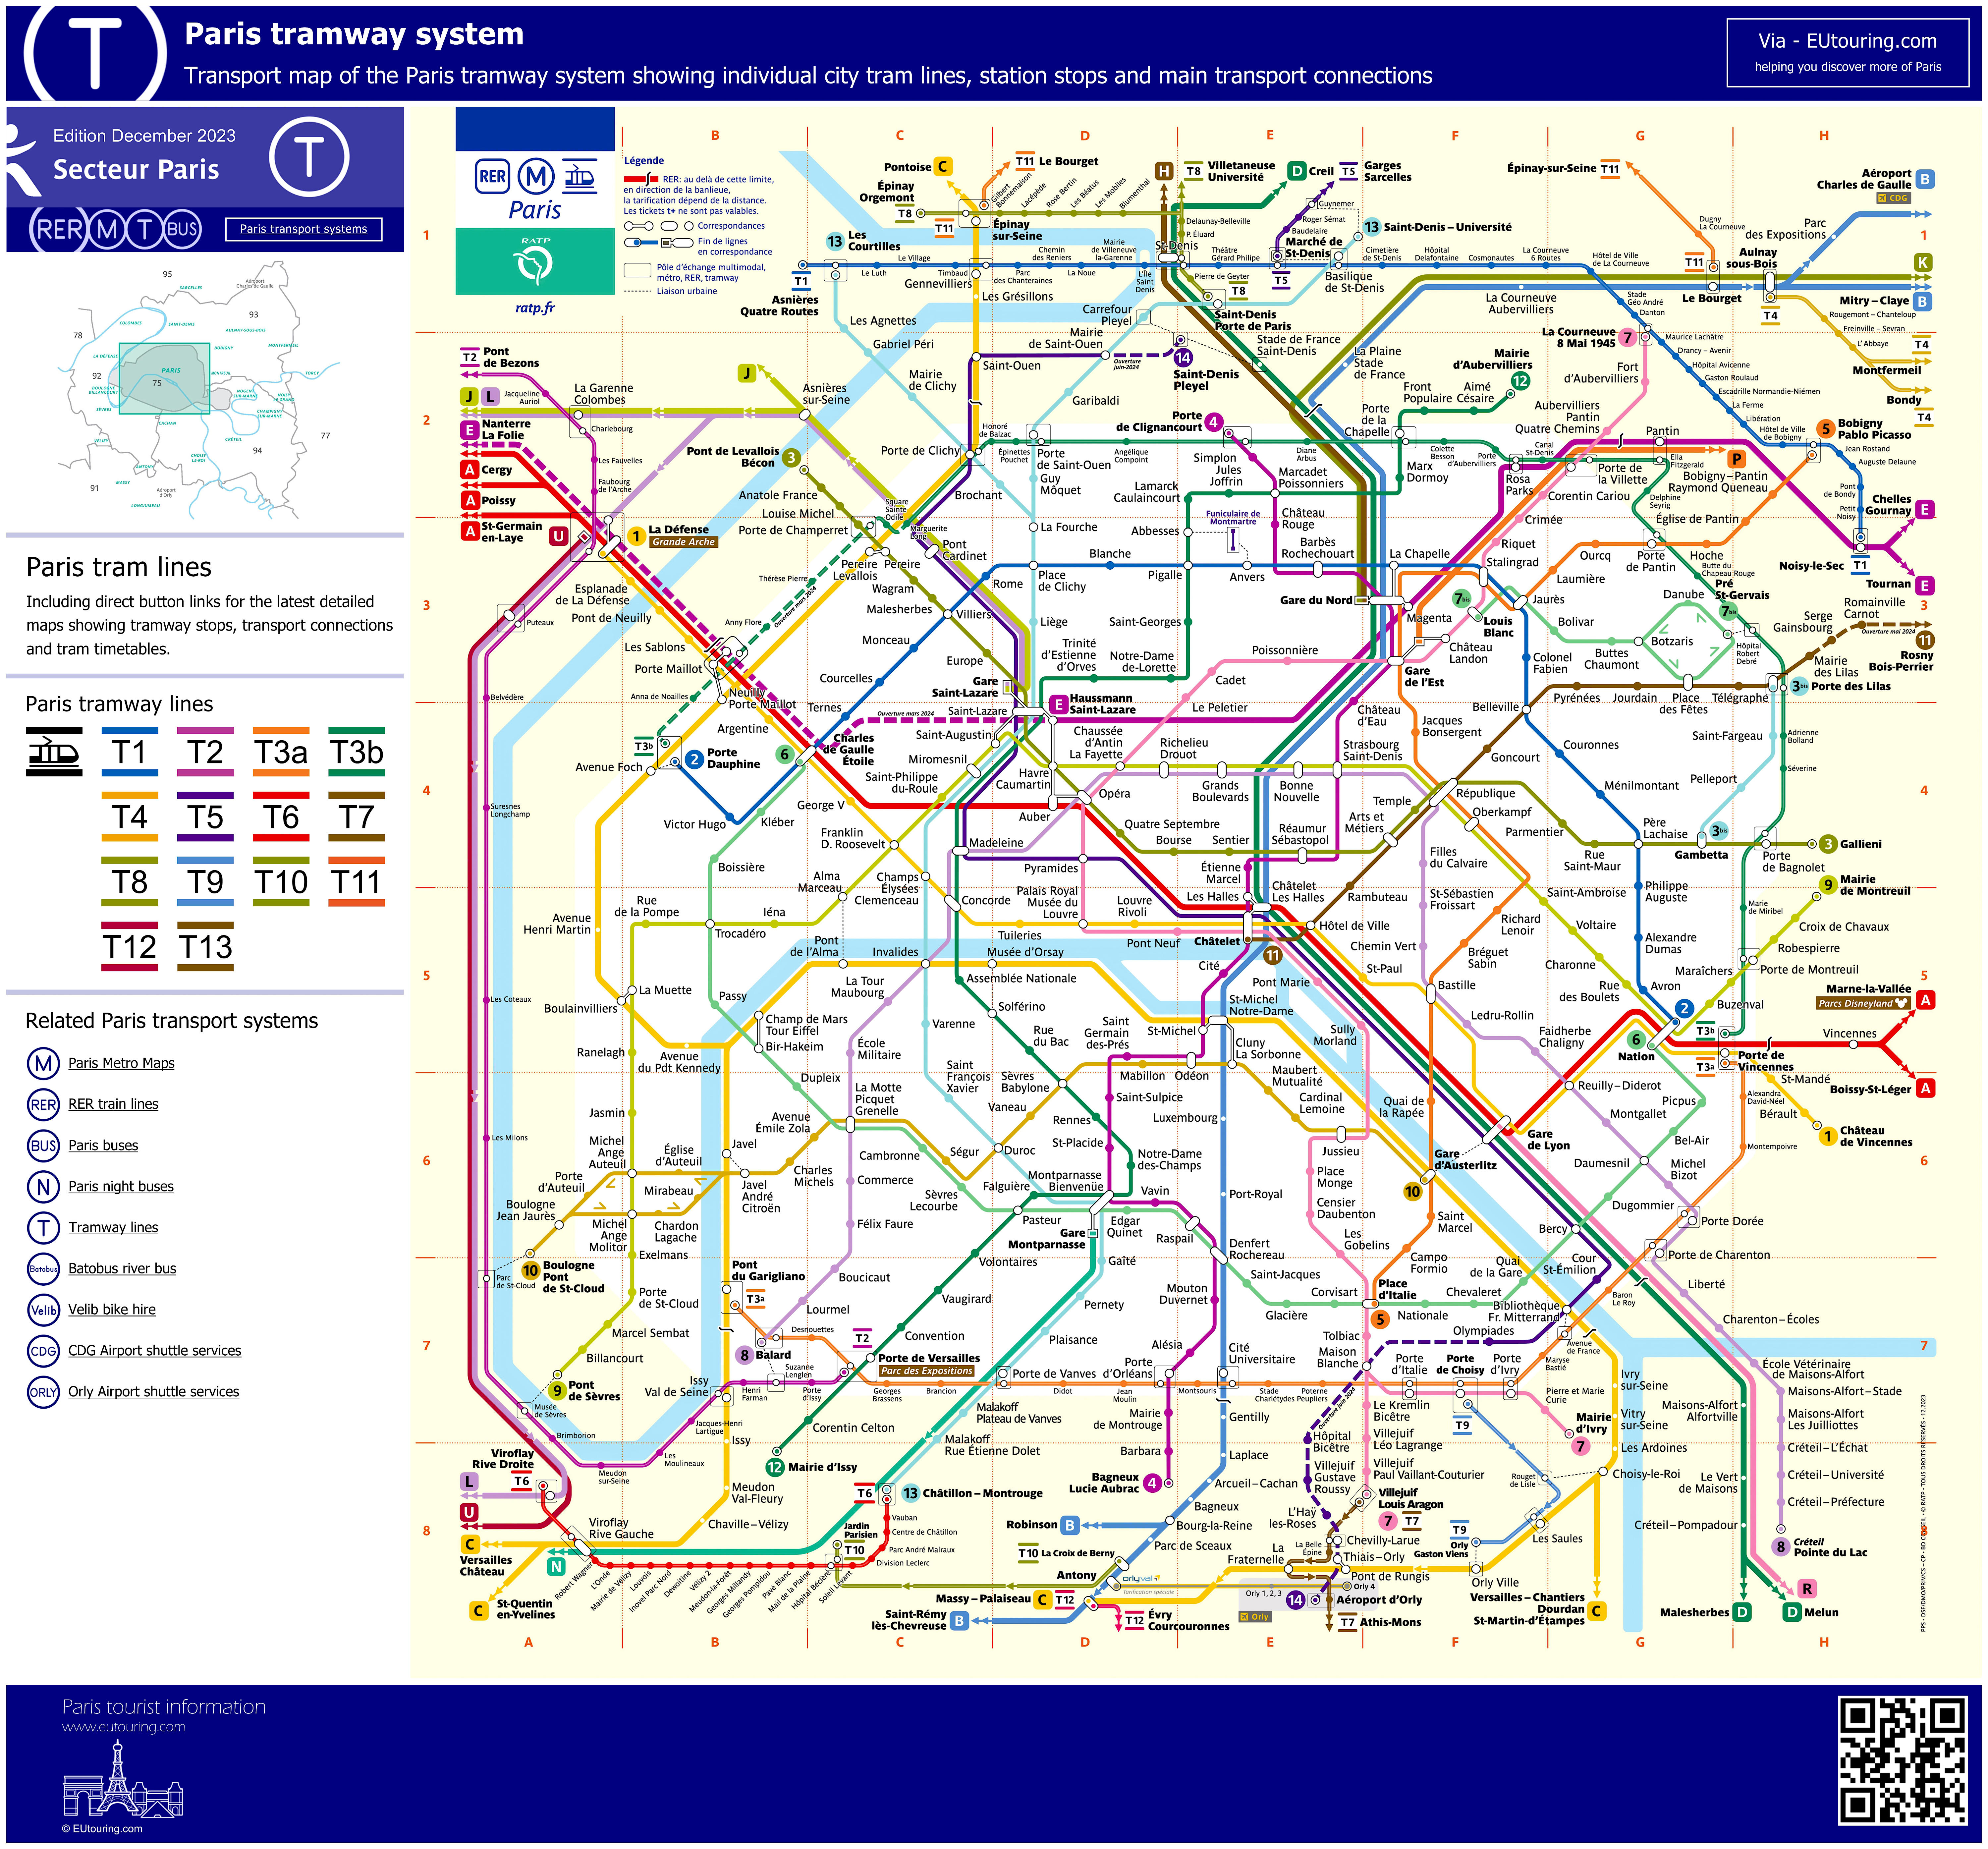 Paris tram maps and timetables for SNCF and RATP city tramways